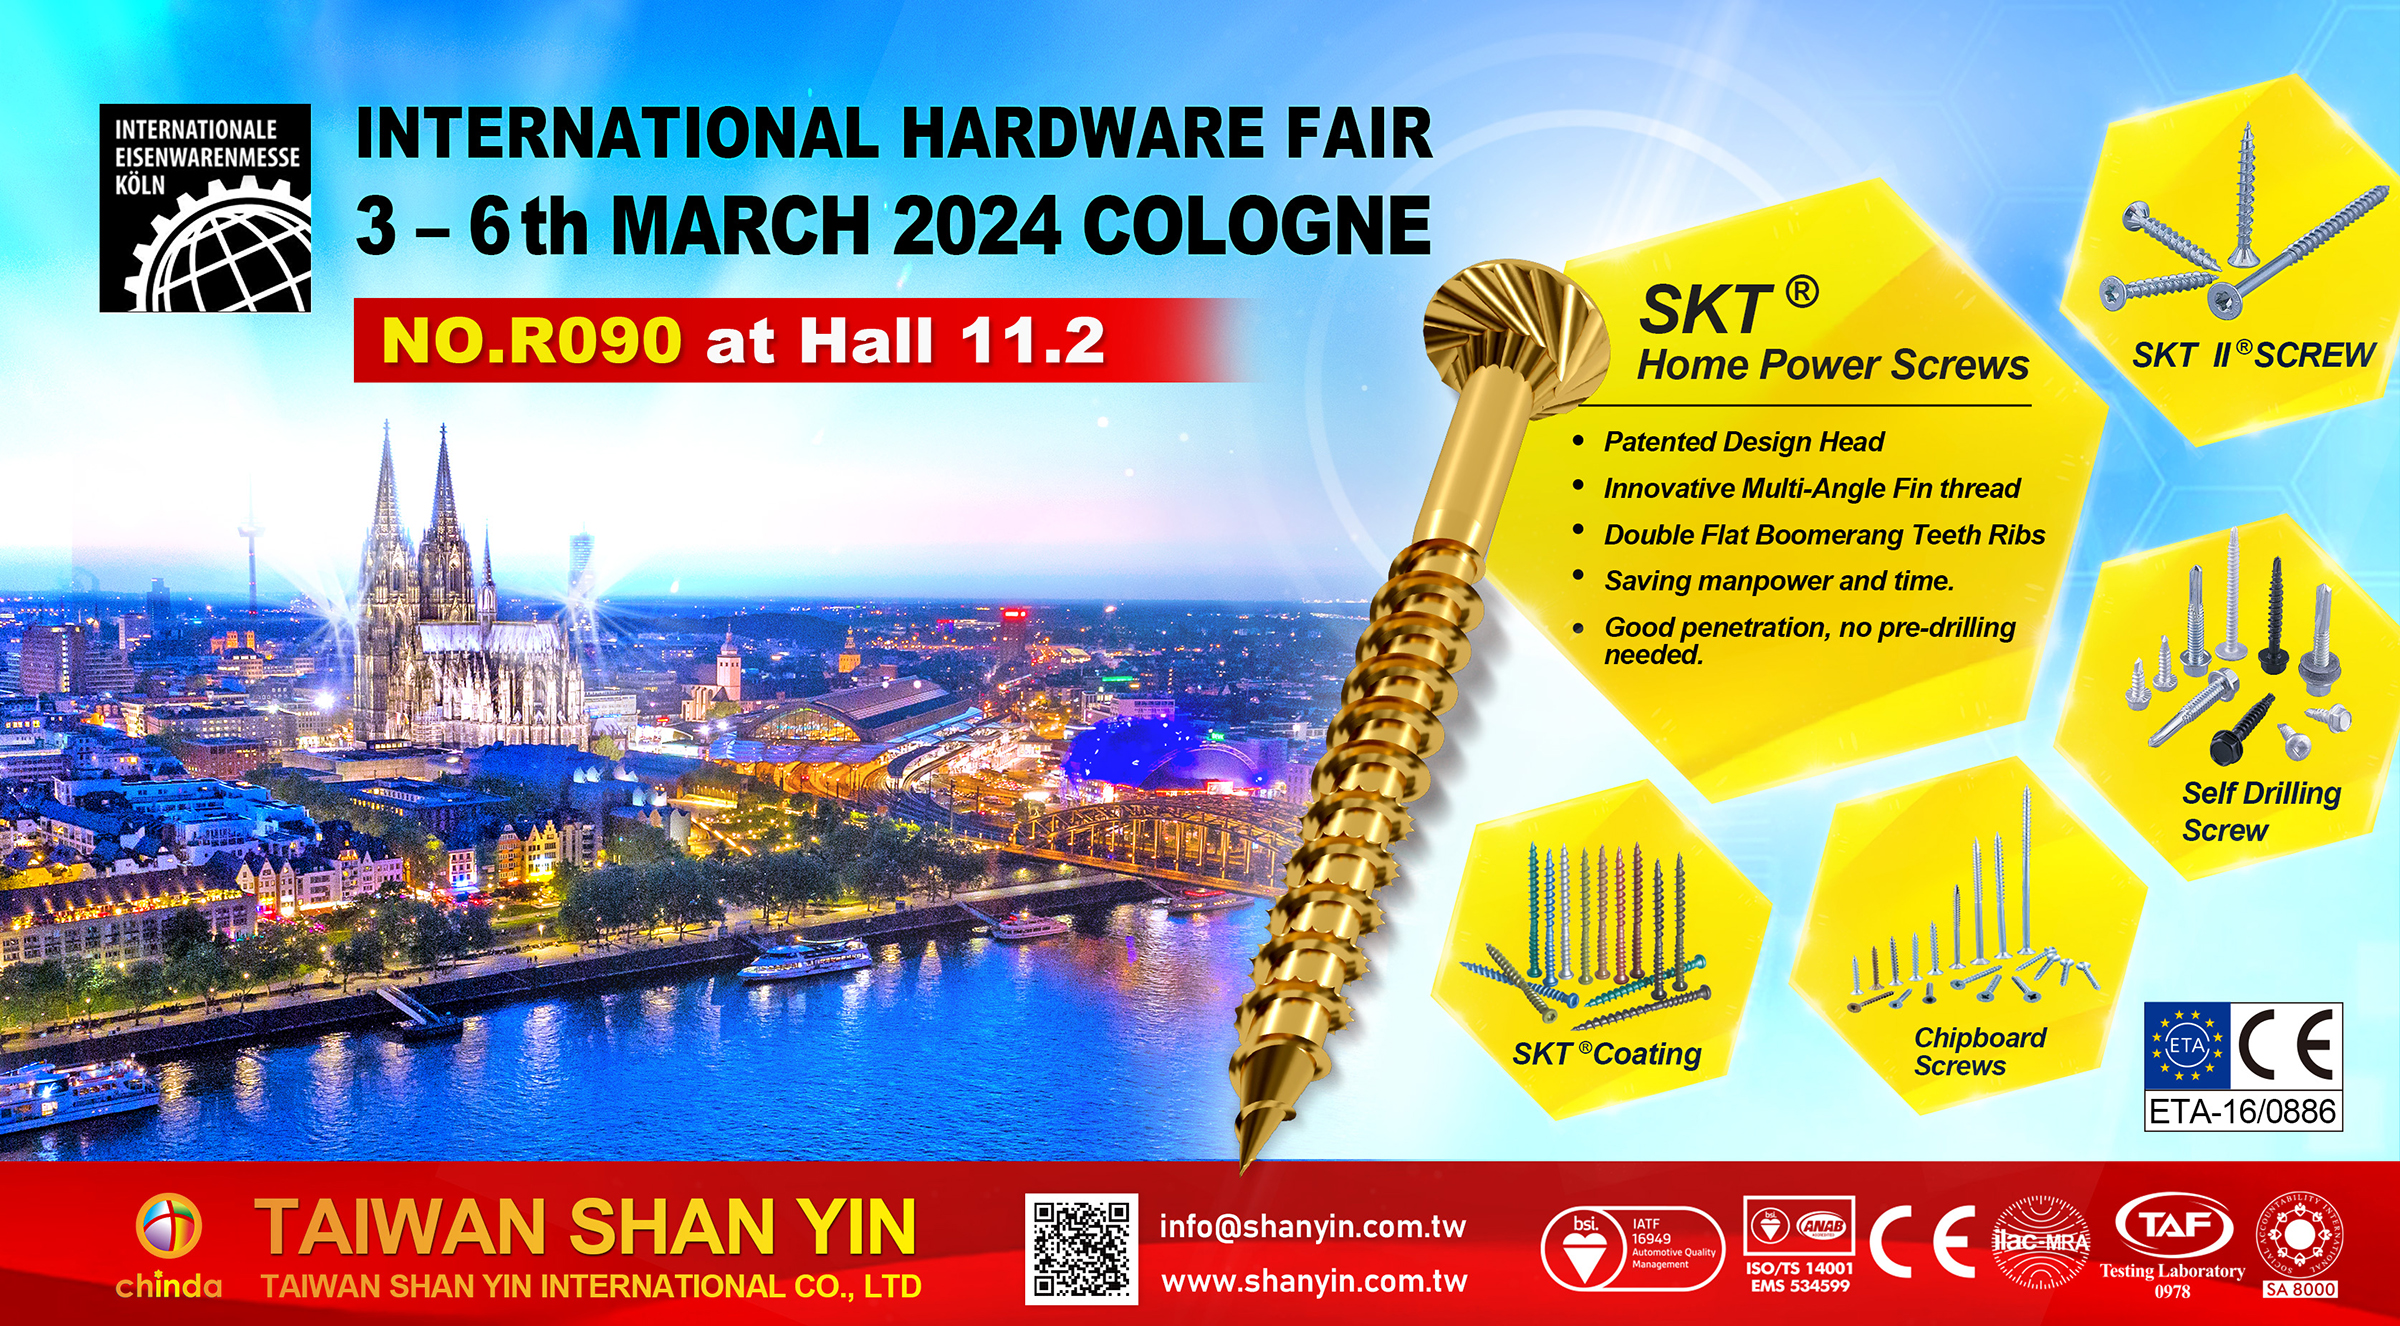 The International Hardware Fair in Germany will take place at the venue on the specified dates. We invite you to visit the TSY Company booth, located at Booth No. R090 in Hall 11.2, to experience our professionalism and innovative products firsthand. We eagerly anticipate your presence and engaging discussions on future collaborations and developments.